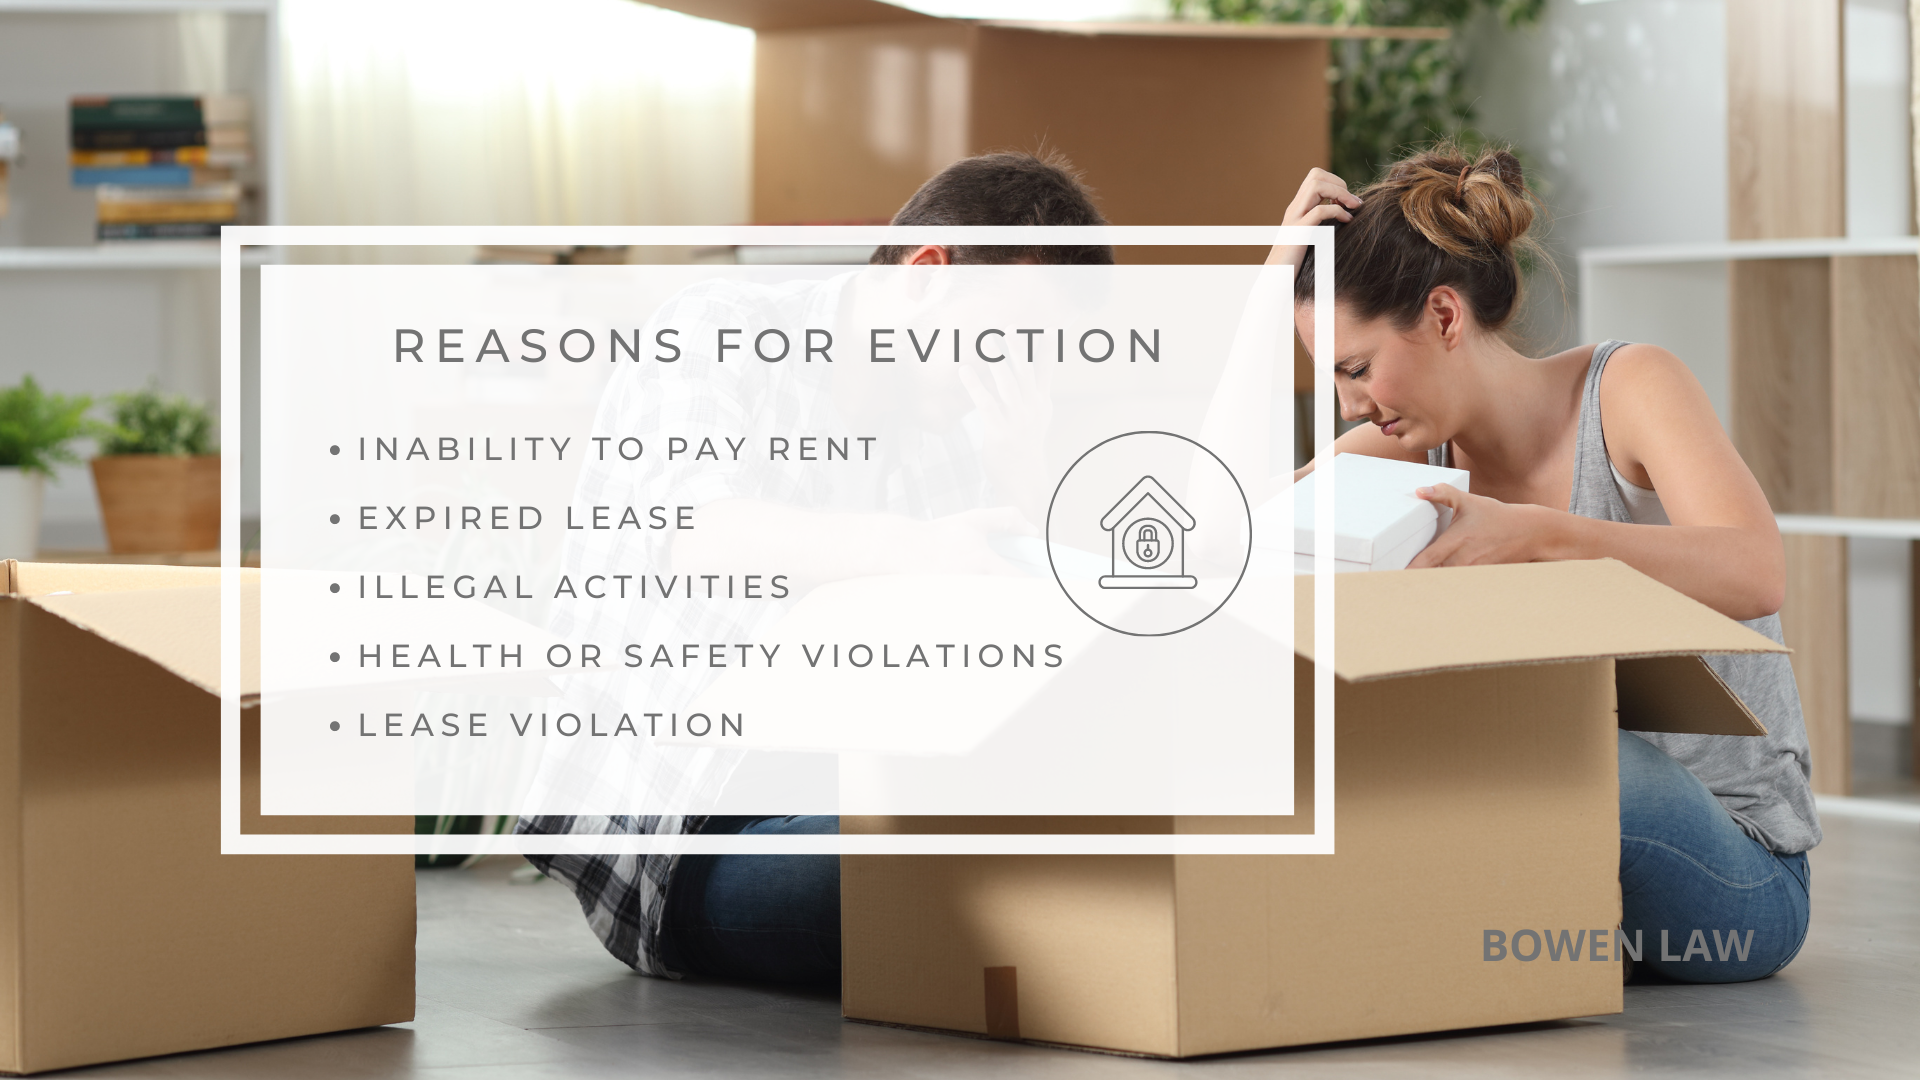  Infographic image of reasons for eviction